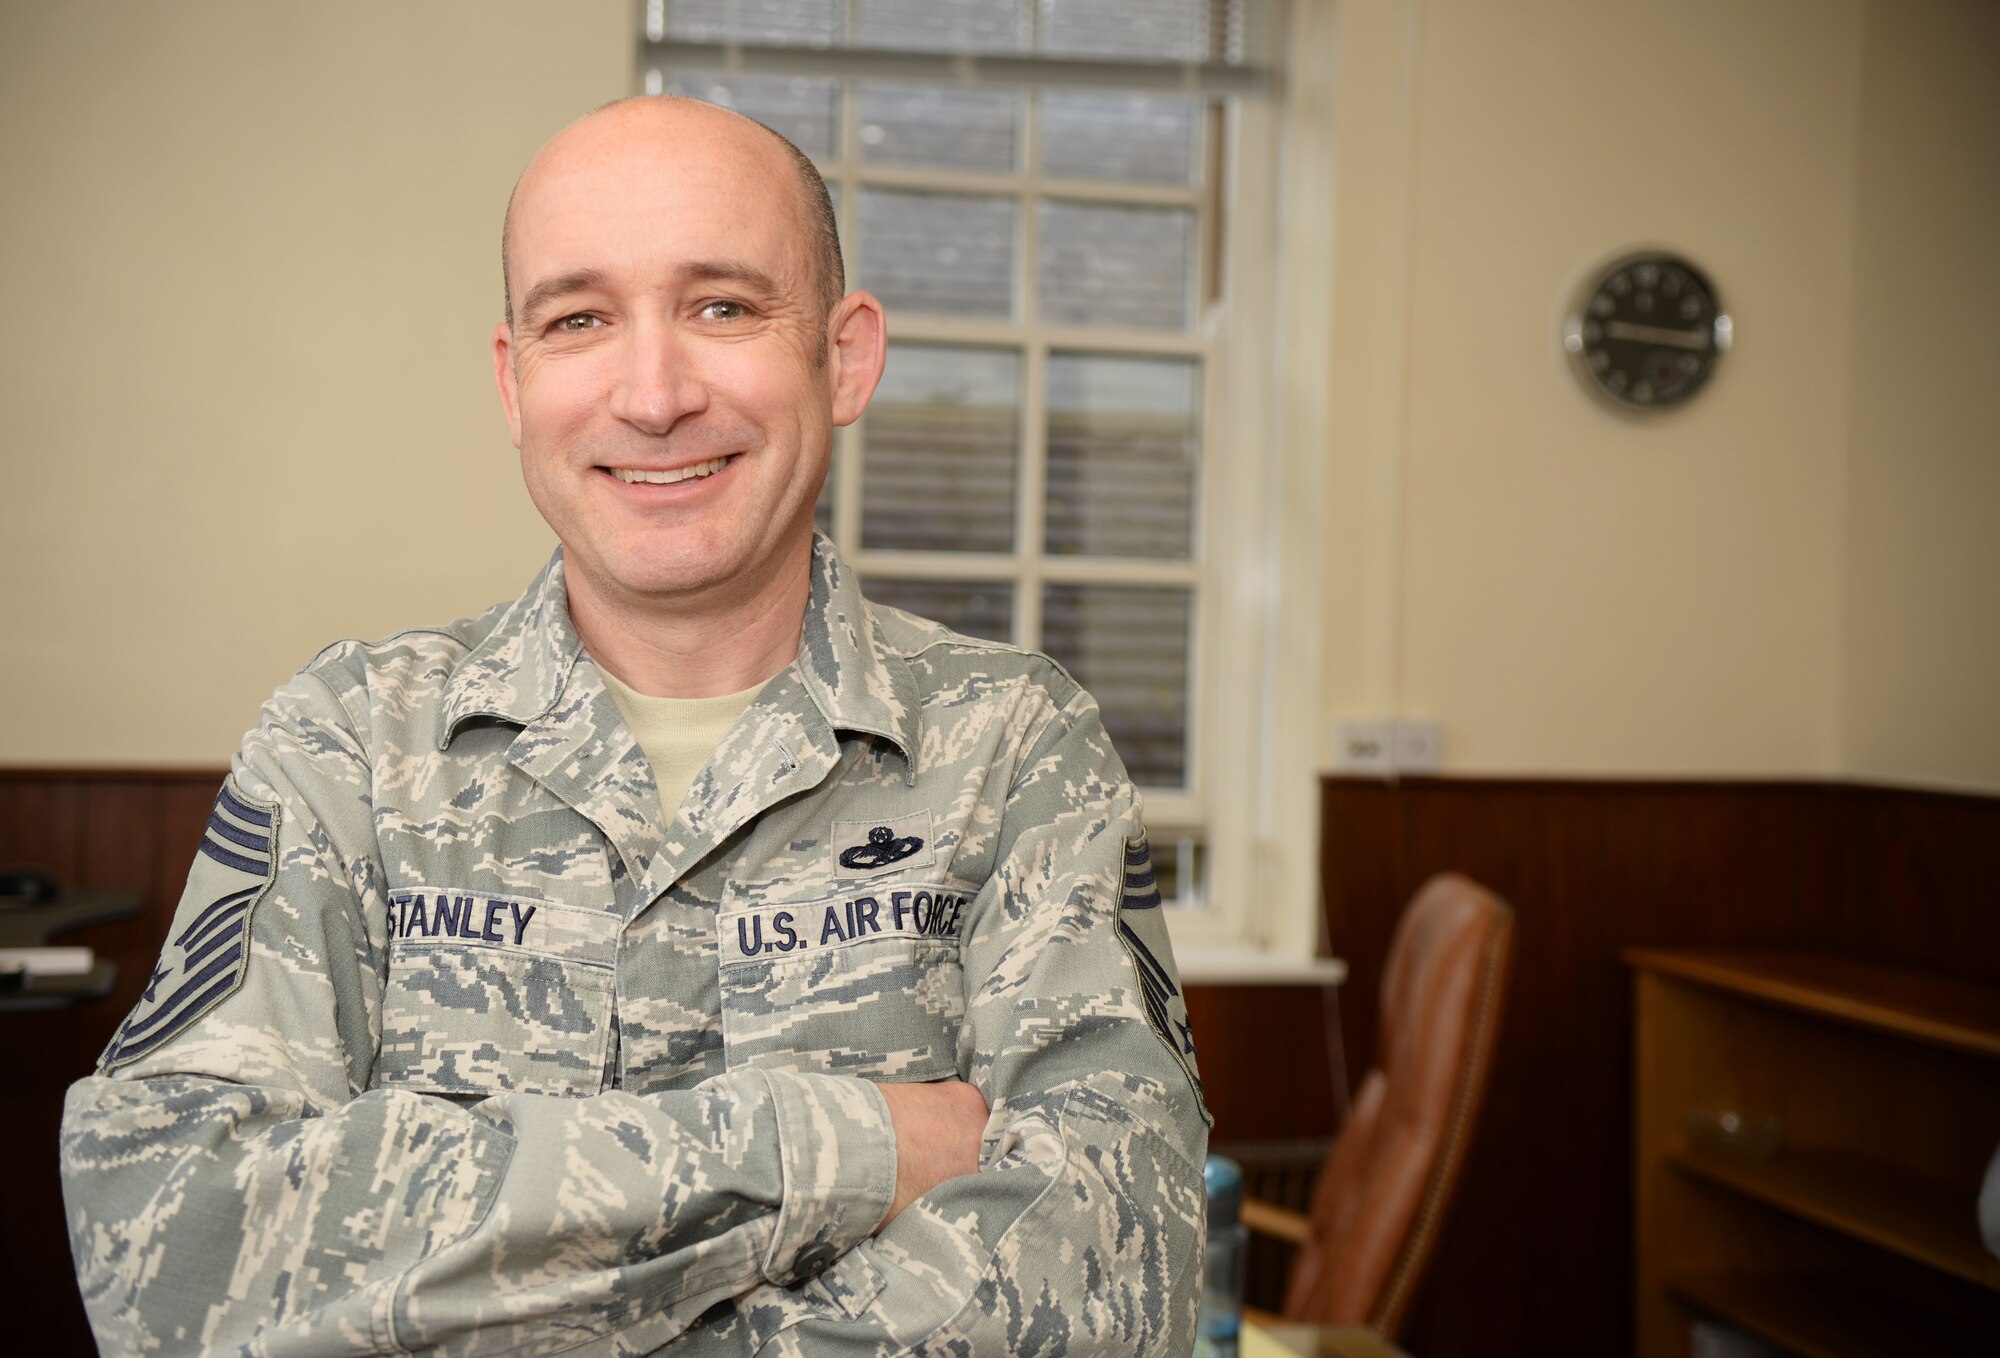 U.S. Air Force Chief Master Sgt. Curt Stanley, 100th Air Refueling Wing command chief, stands in his new office June 29, 2016, on RAF Mildenhall, England. Stanley has been a part of Team Mildenhall for four years and served as the 100th Maintenance Group superintendent before assuming the role as the 100th ARW command chief July 1, 2016. (U.S. Air Force photo by Airman 1st Class Tenley Long/Released)